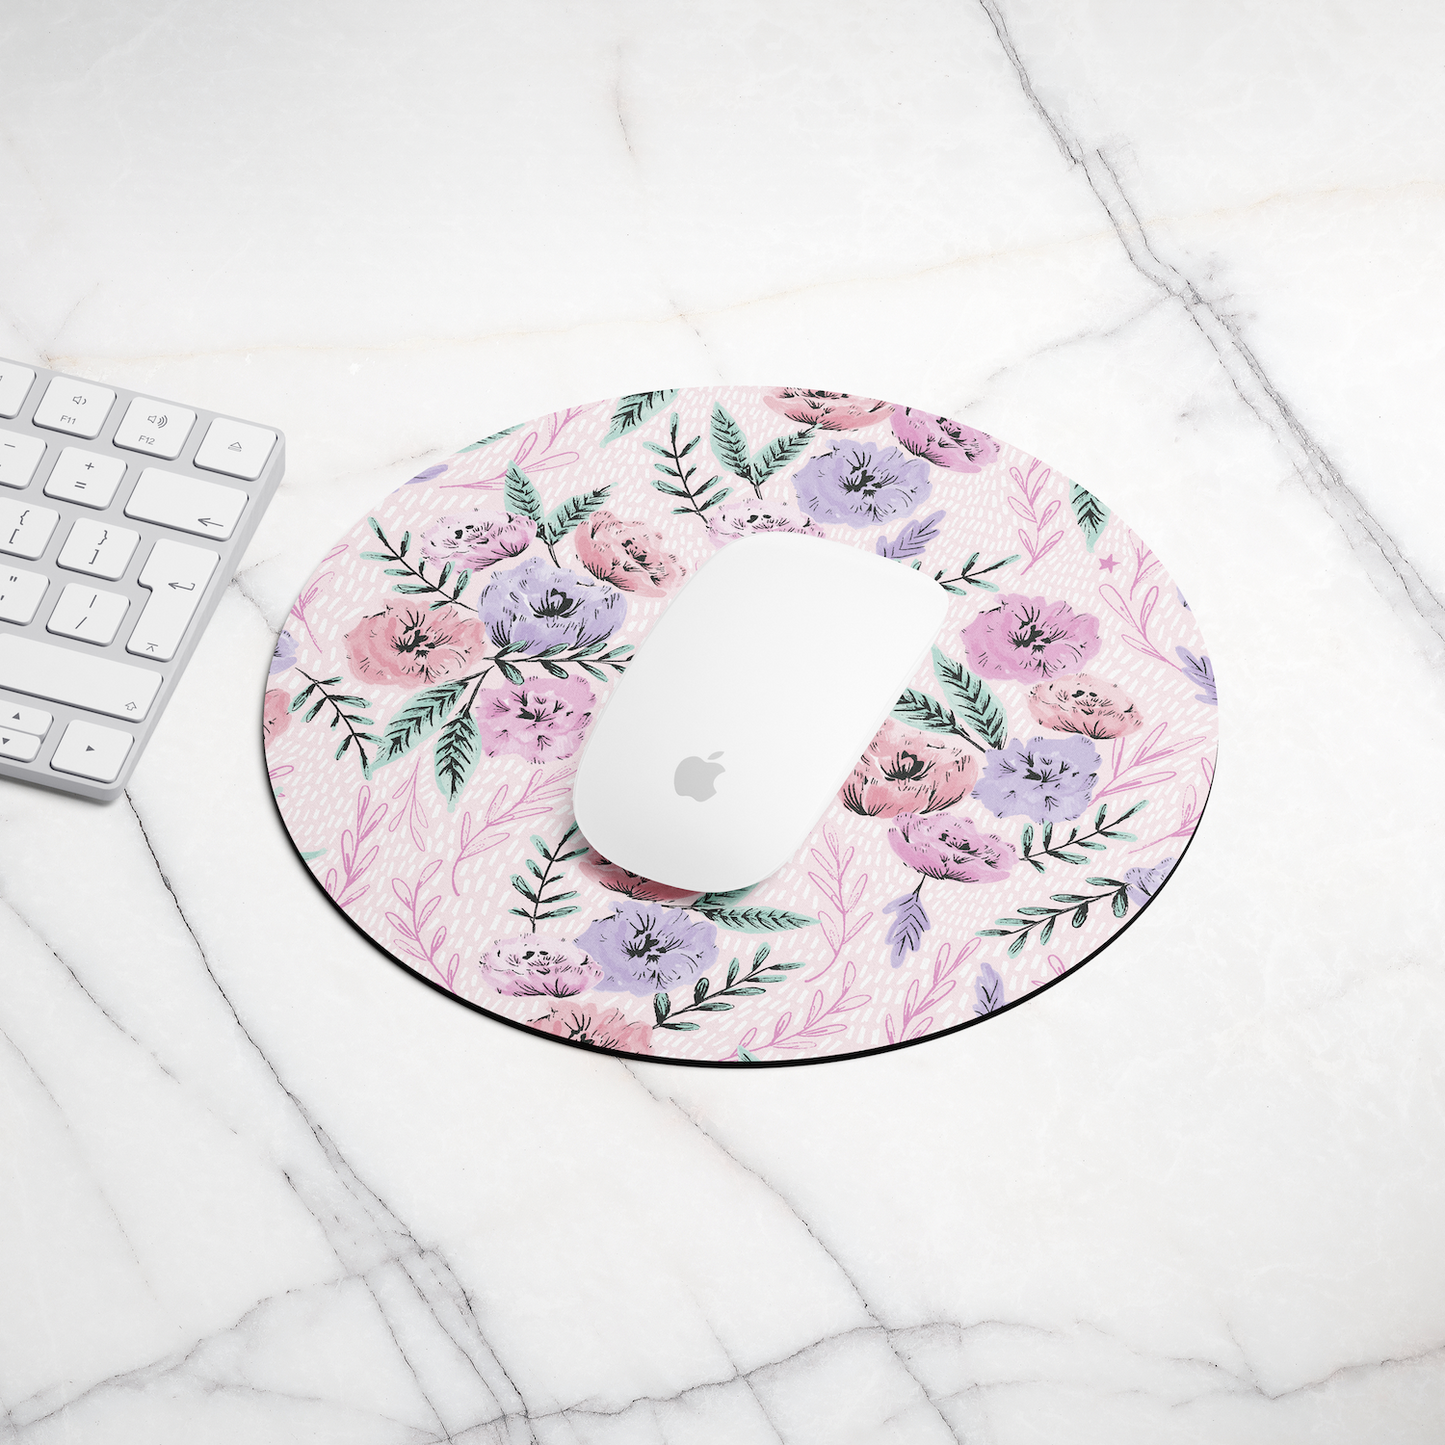 Mouse Pad - Imagine Bouquet in Daylight